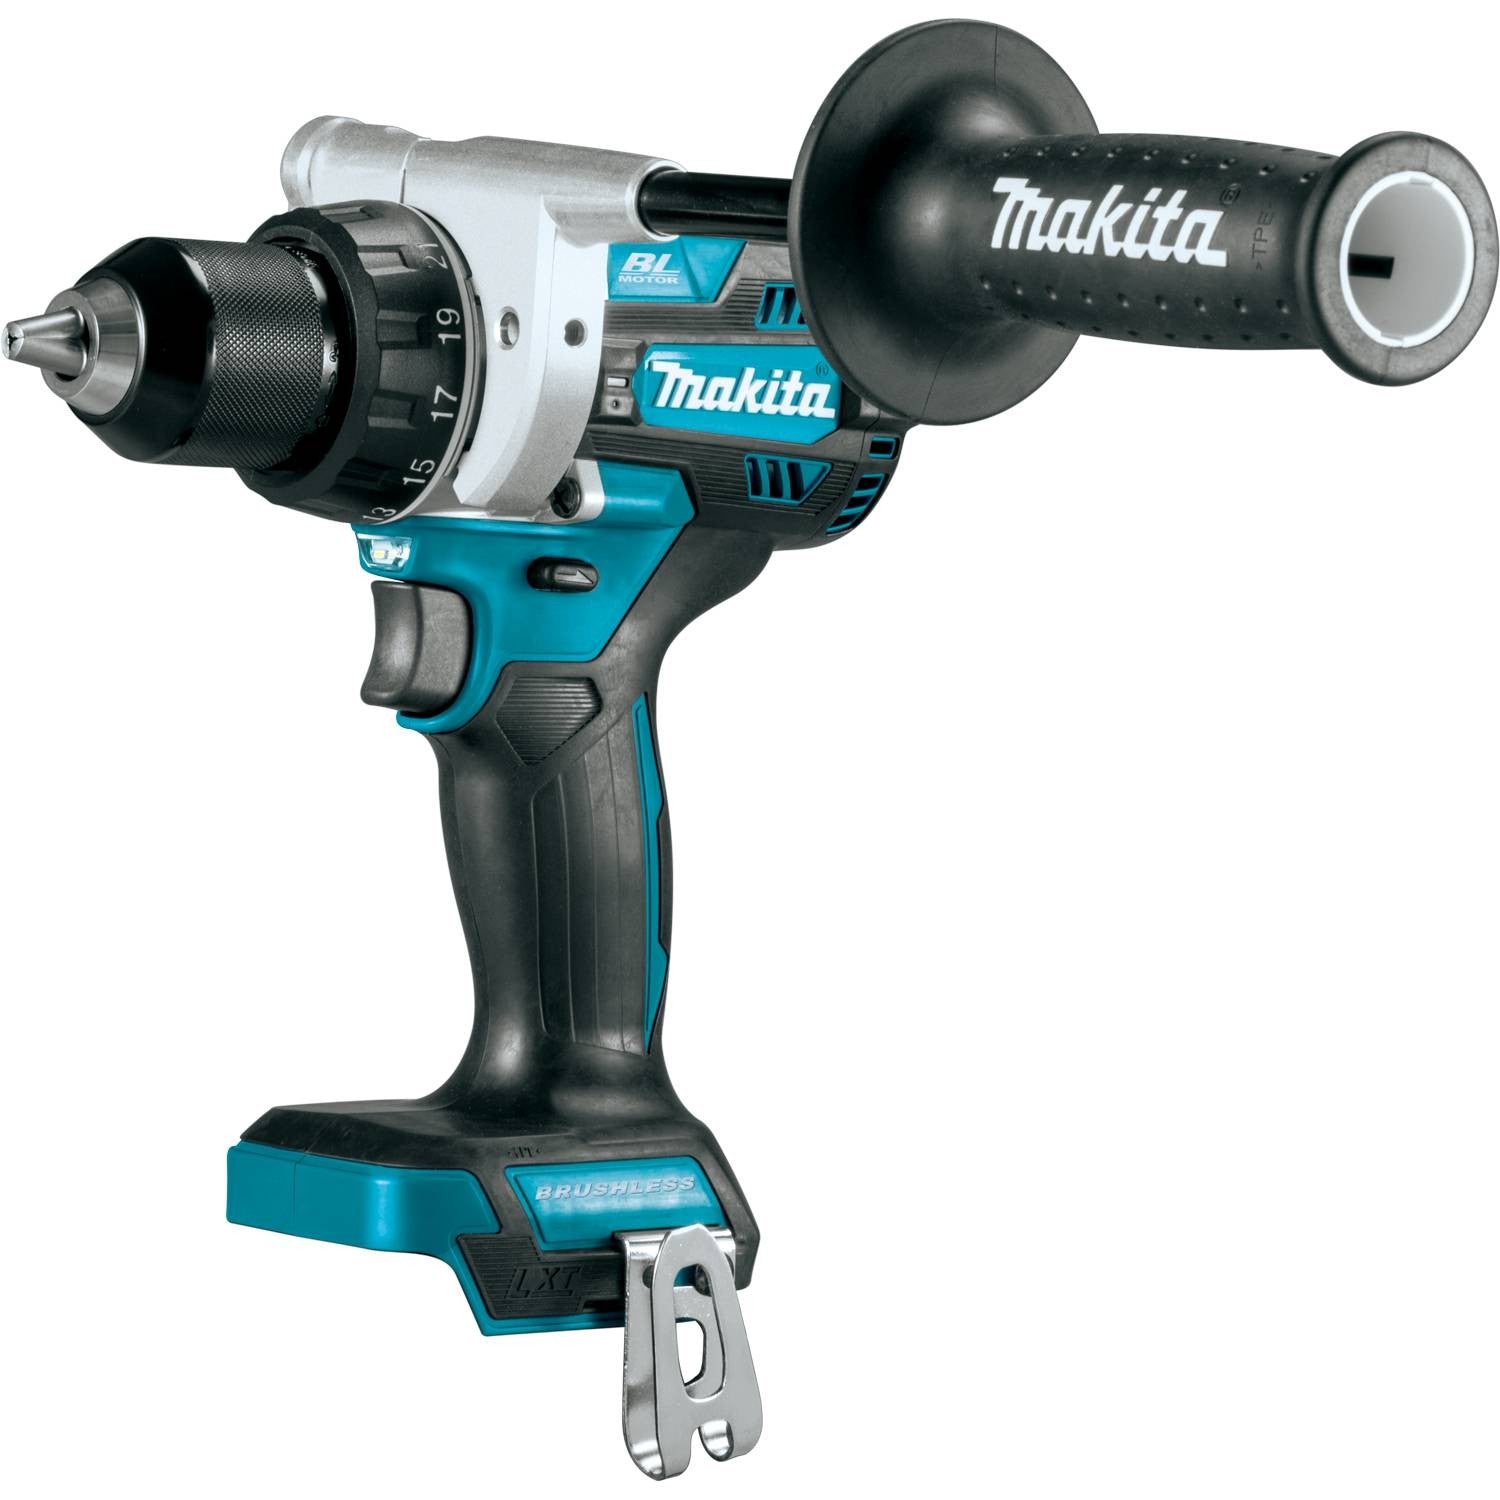 Makita XFD14Z 18V LXT Cordless 1/2" Driver-Drill, Tool Only